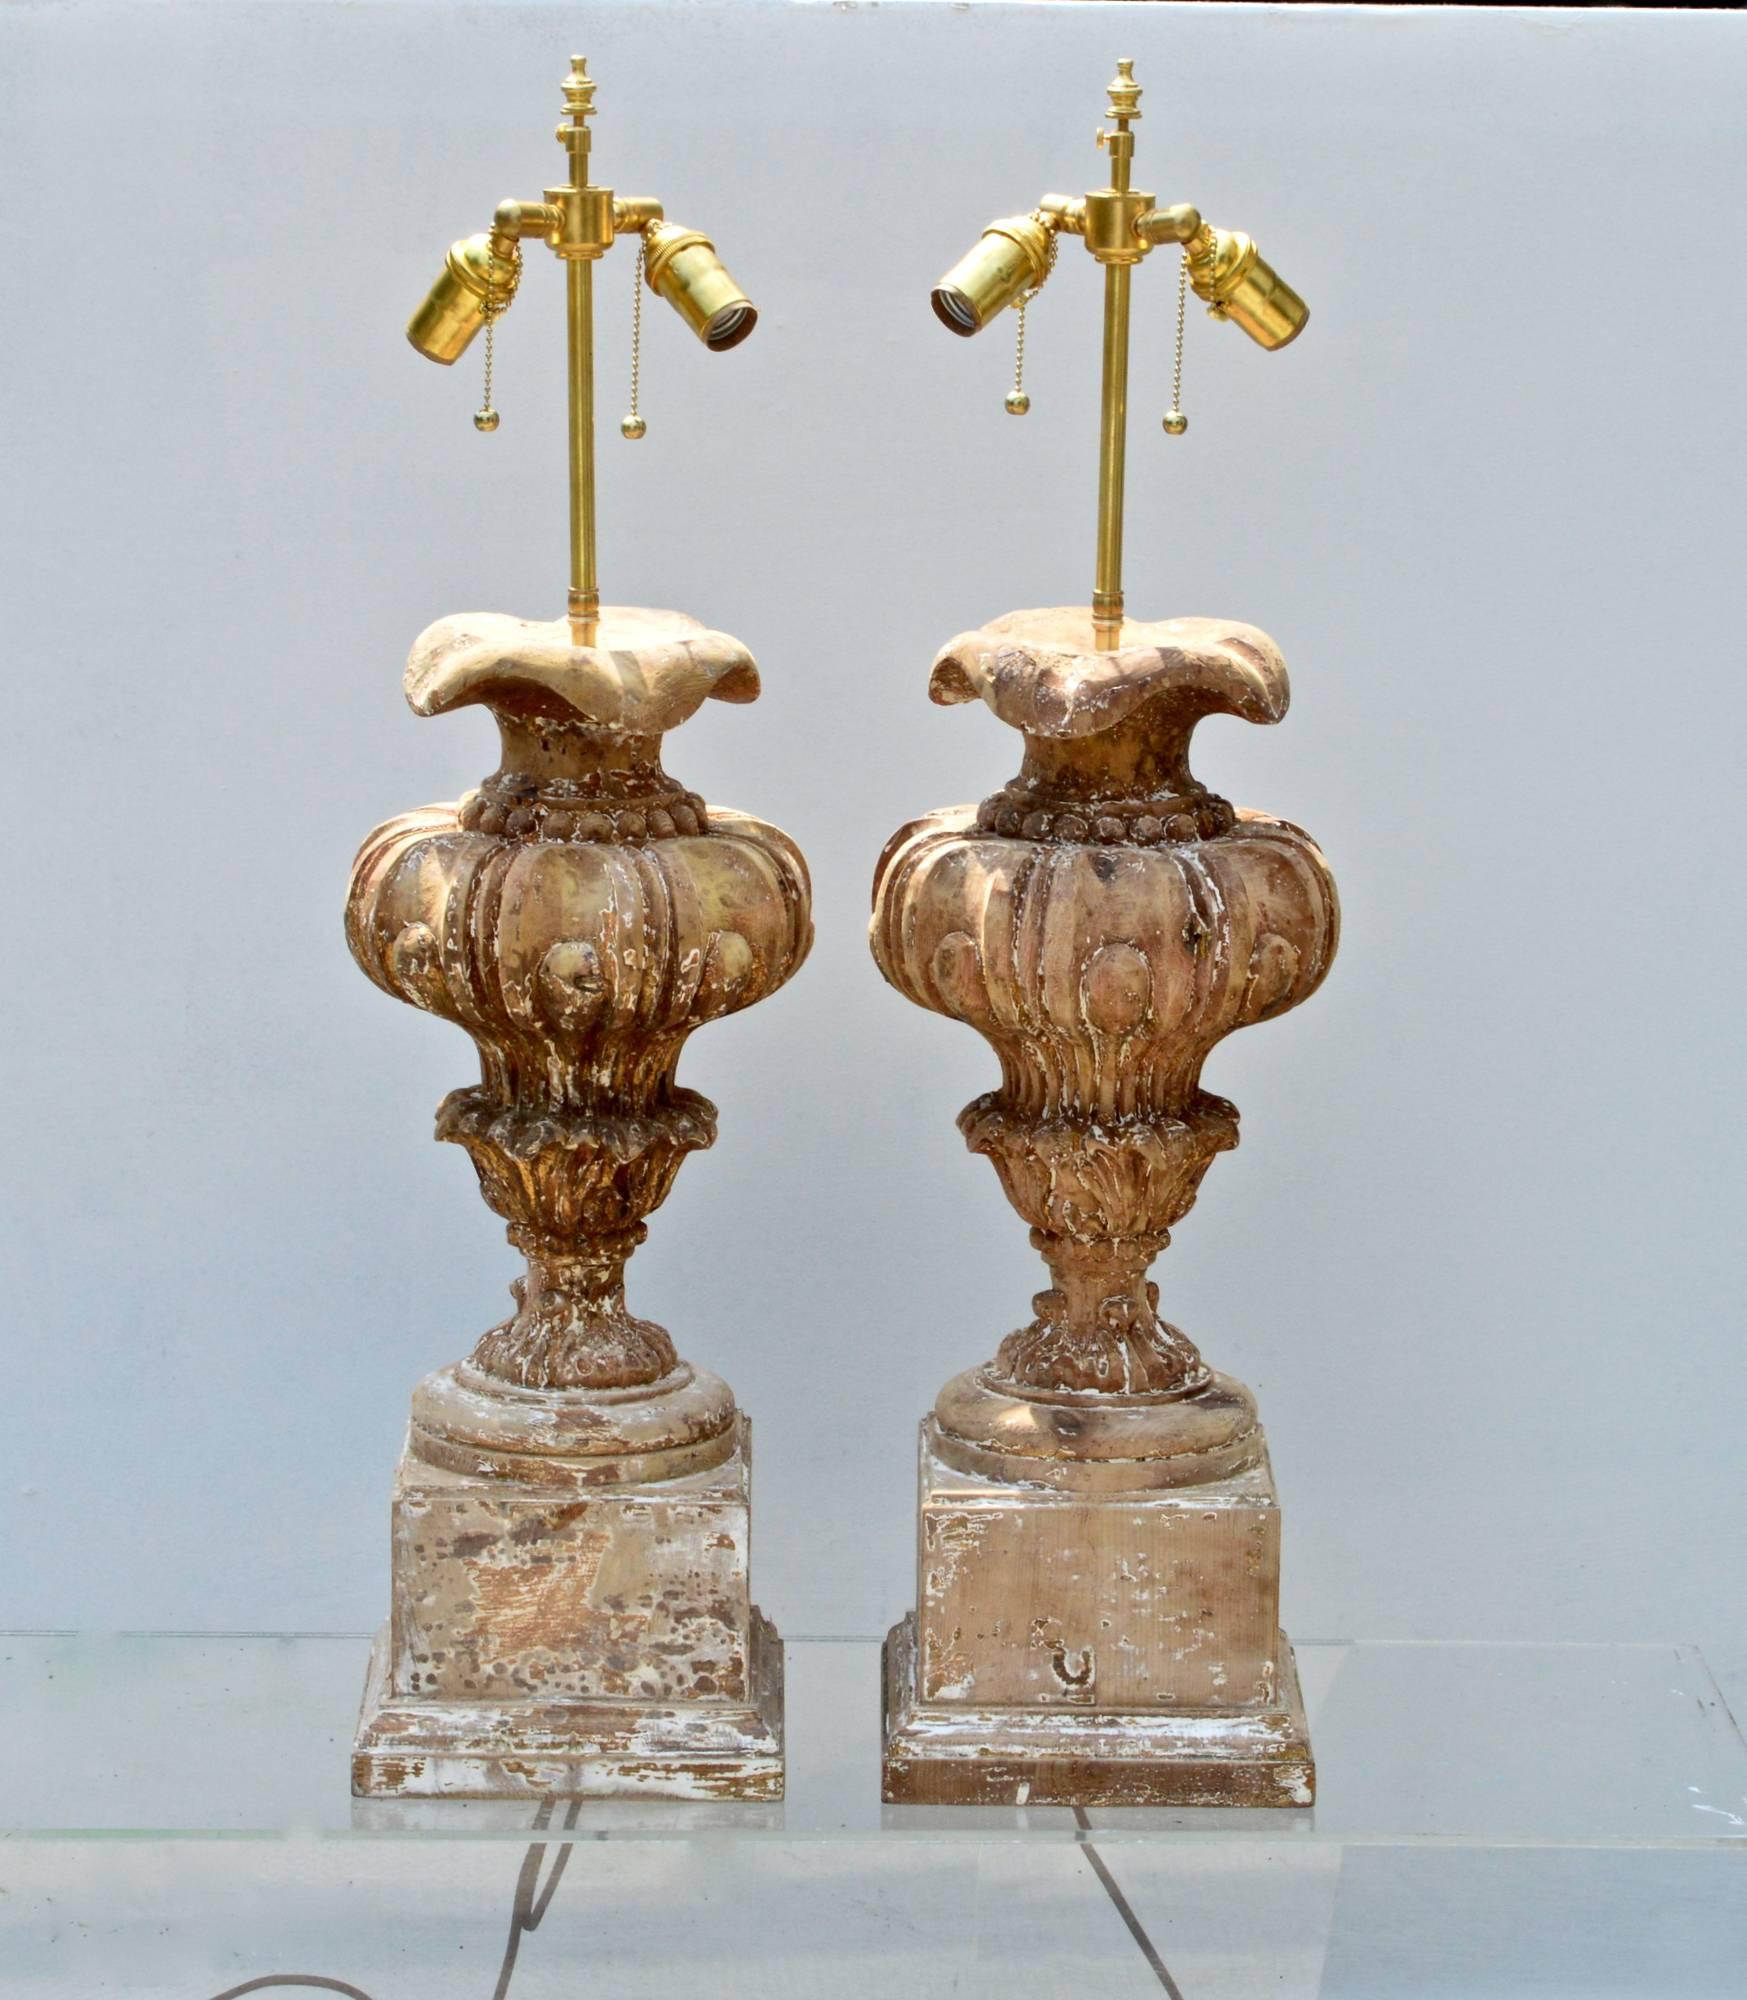 A large-scale pair of baroque inspired table lamps of carved pine having a bleached and distressed finish. Newly wired with brass double socket clusters and brown cloth wrapped cords, the lights will add drama and flare to any room in which they are